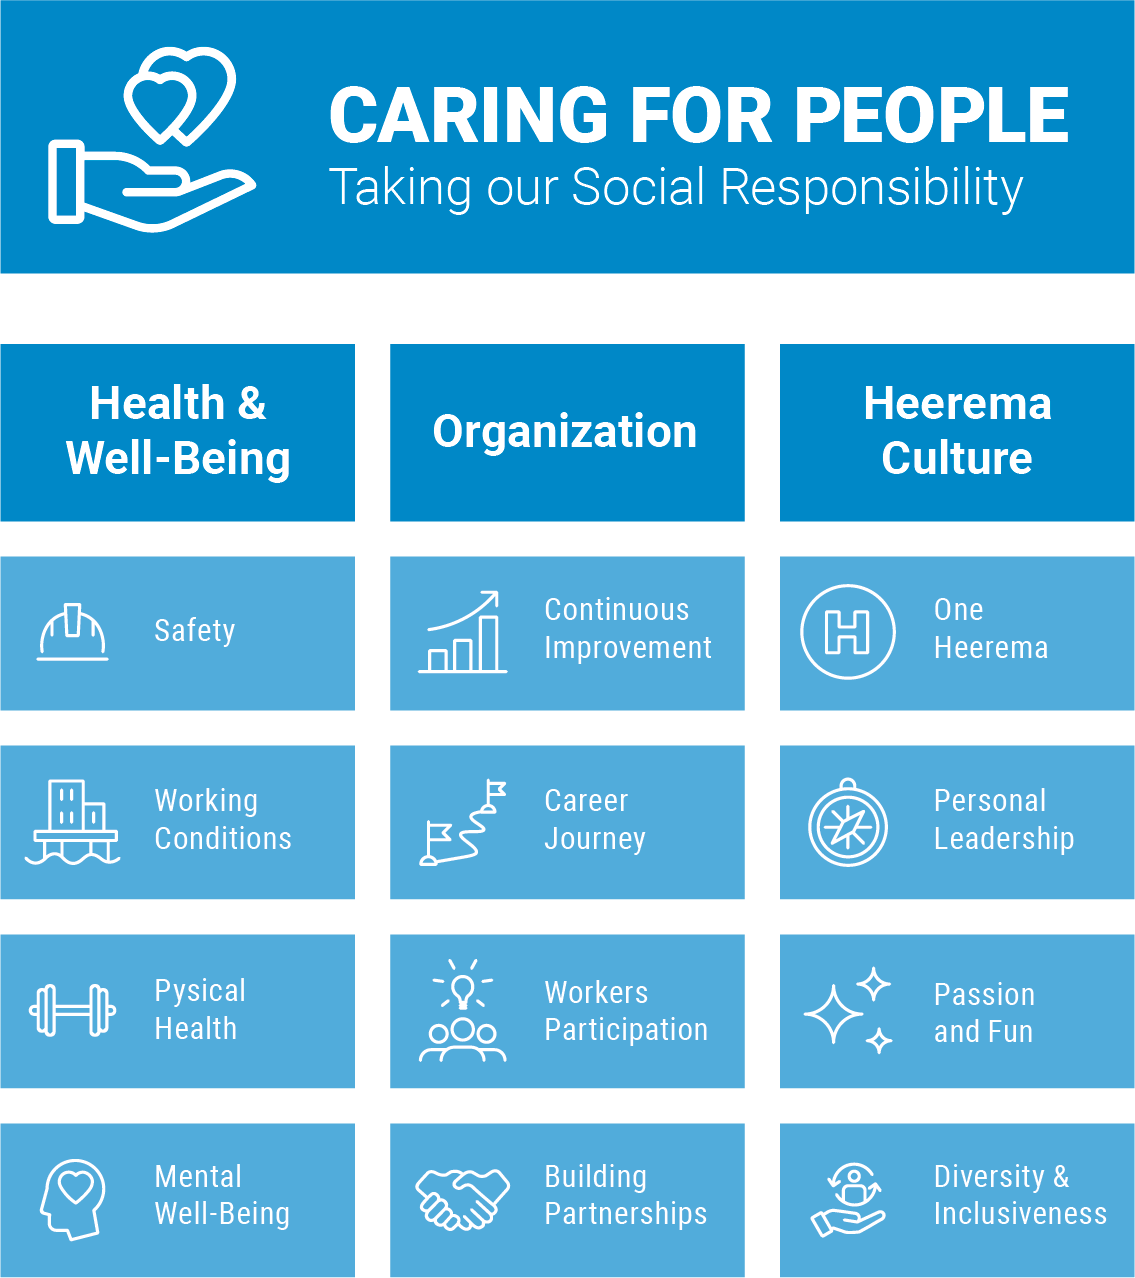 HMC Sustainability Ambition Caring for People